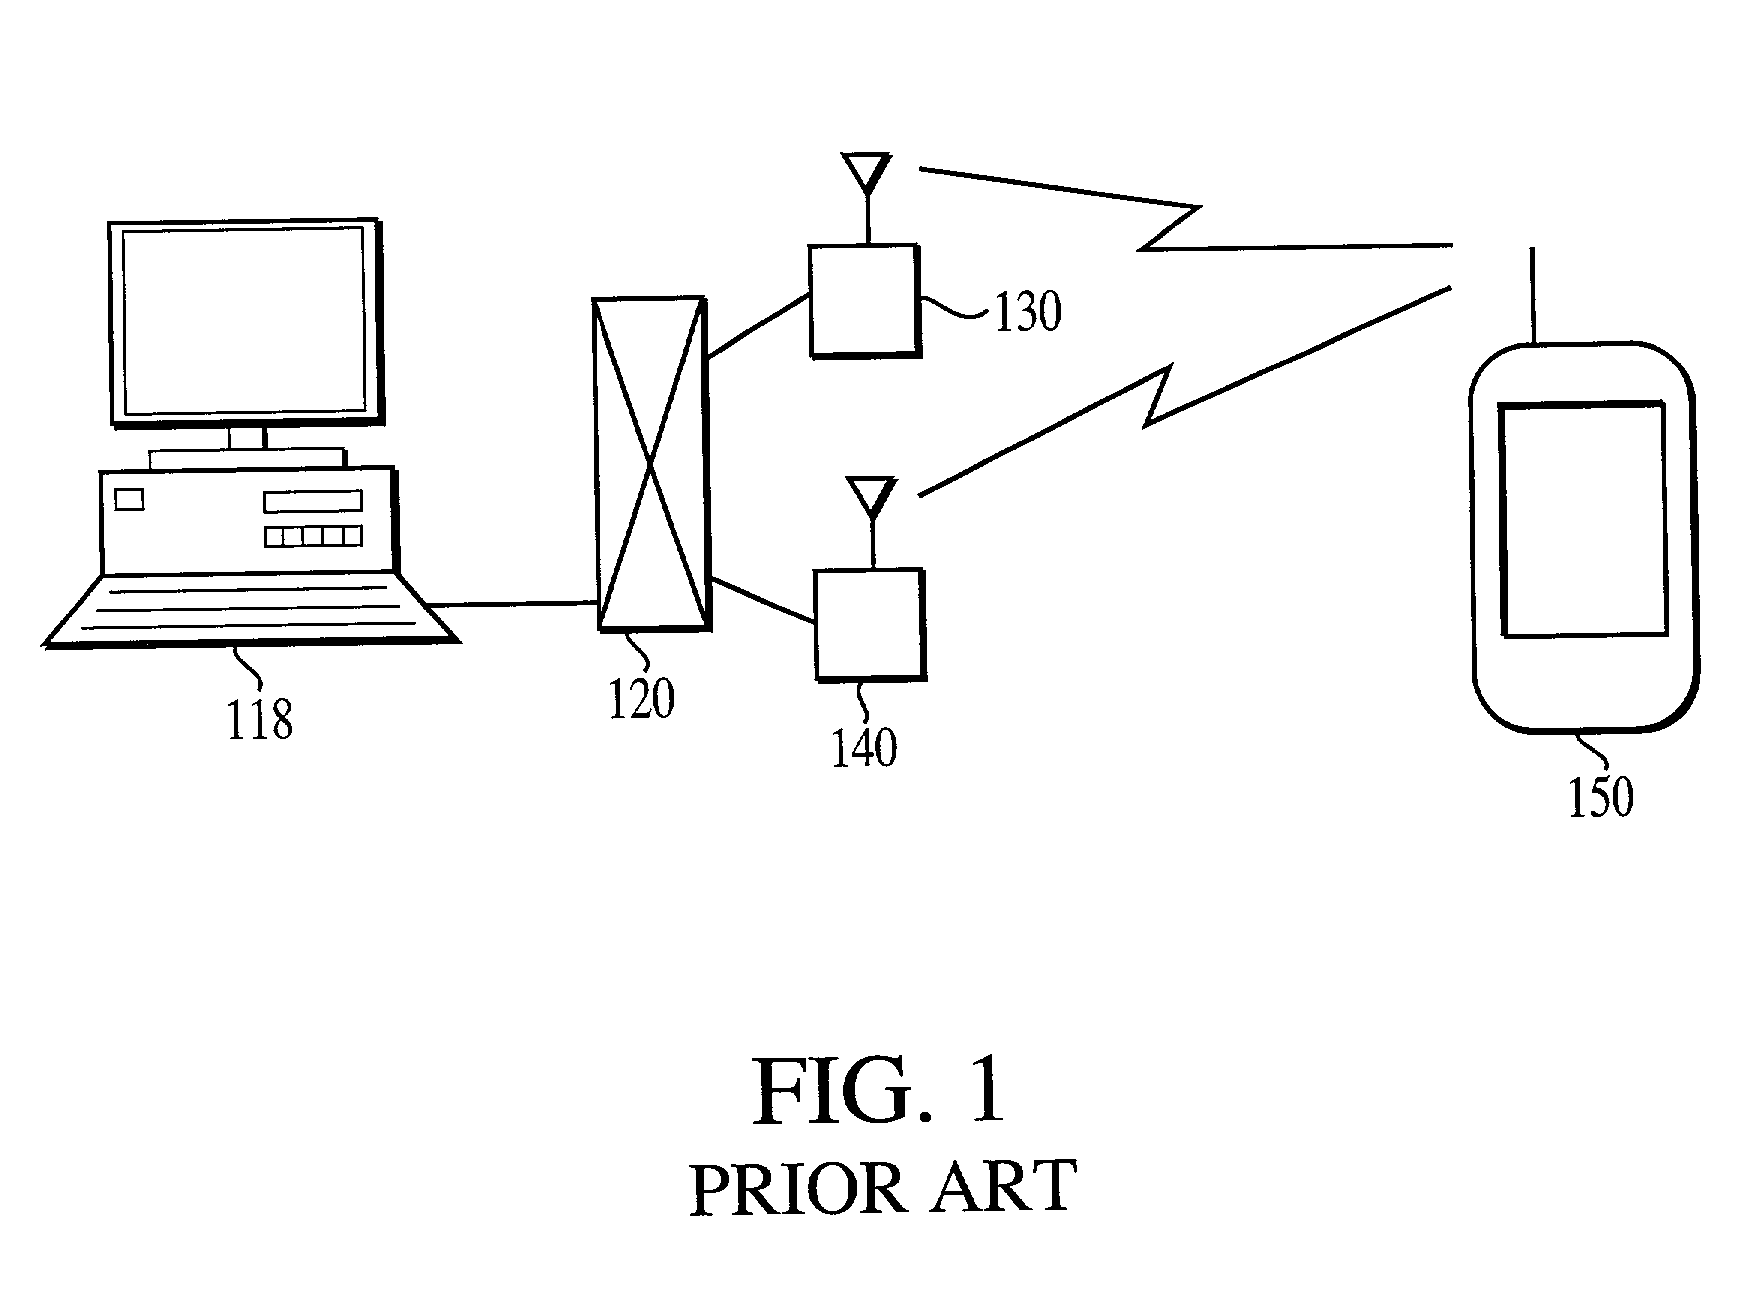 Communication system with wireless electronic mail or messaging integrated and/or associated with application program residing on remote computing device